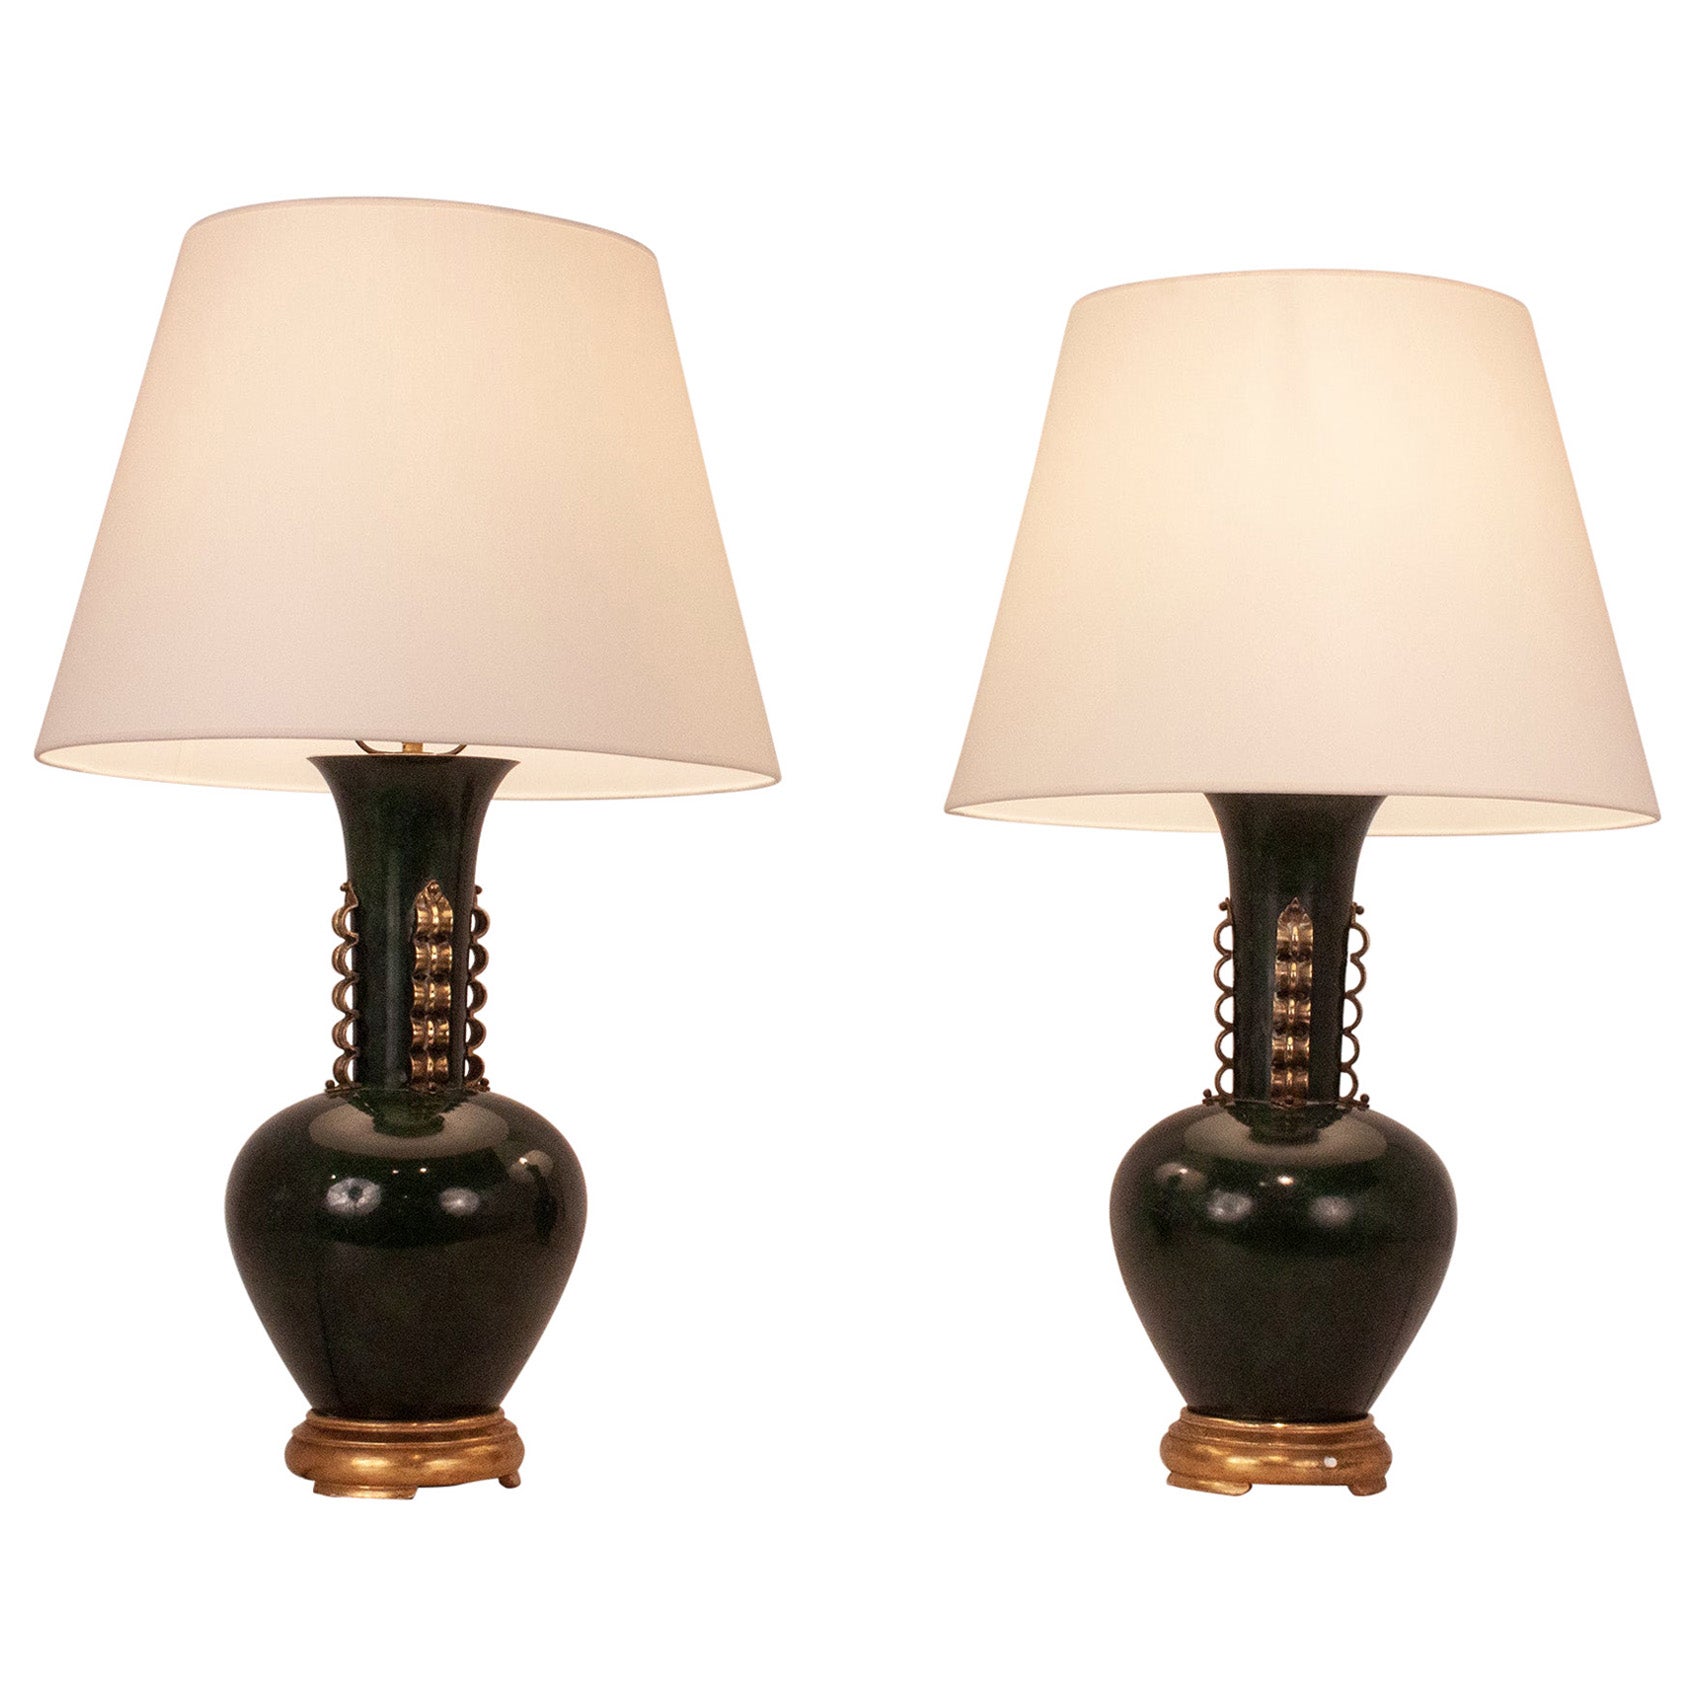 Large Pair of Italian Table Lamps, in the Manner of Gio Ponti, Metal and Brass